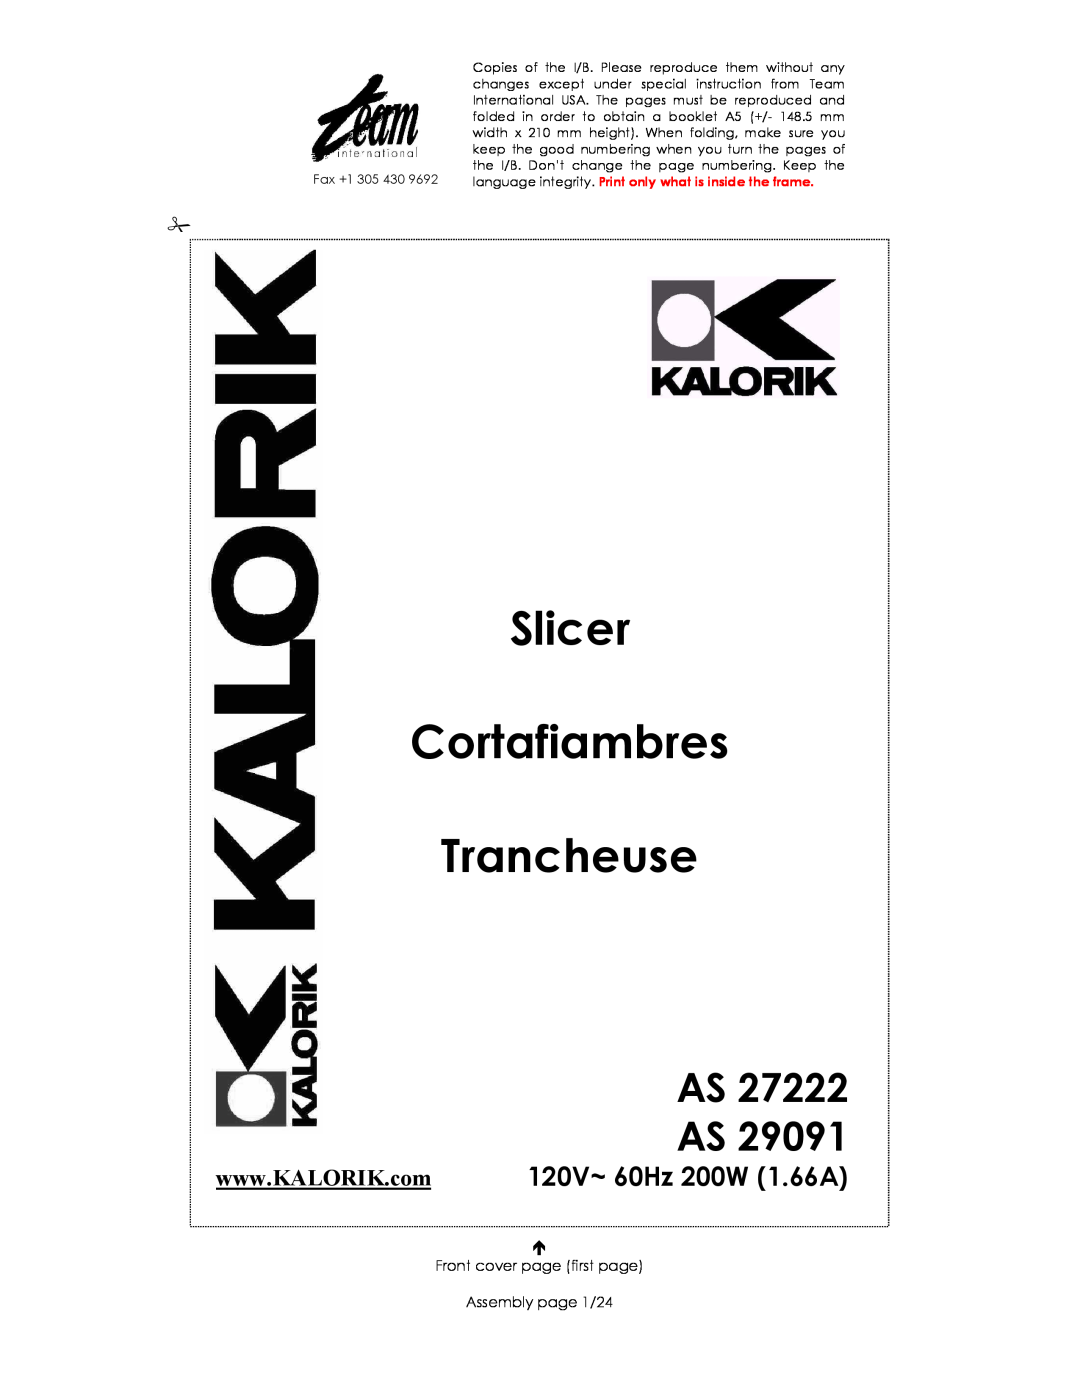 Kalorik AS 27222, AS 29091 manual As As, Slicer Cortafiambres Trancheuse, Front cover page first page Assembly page 1/24 